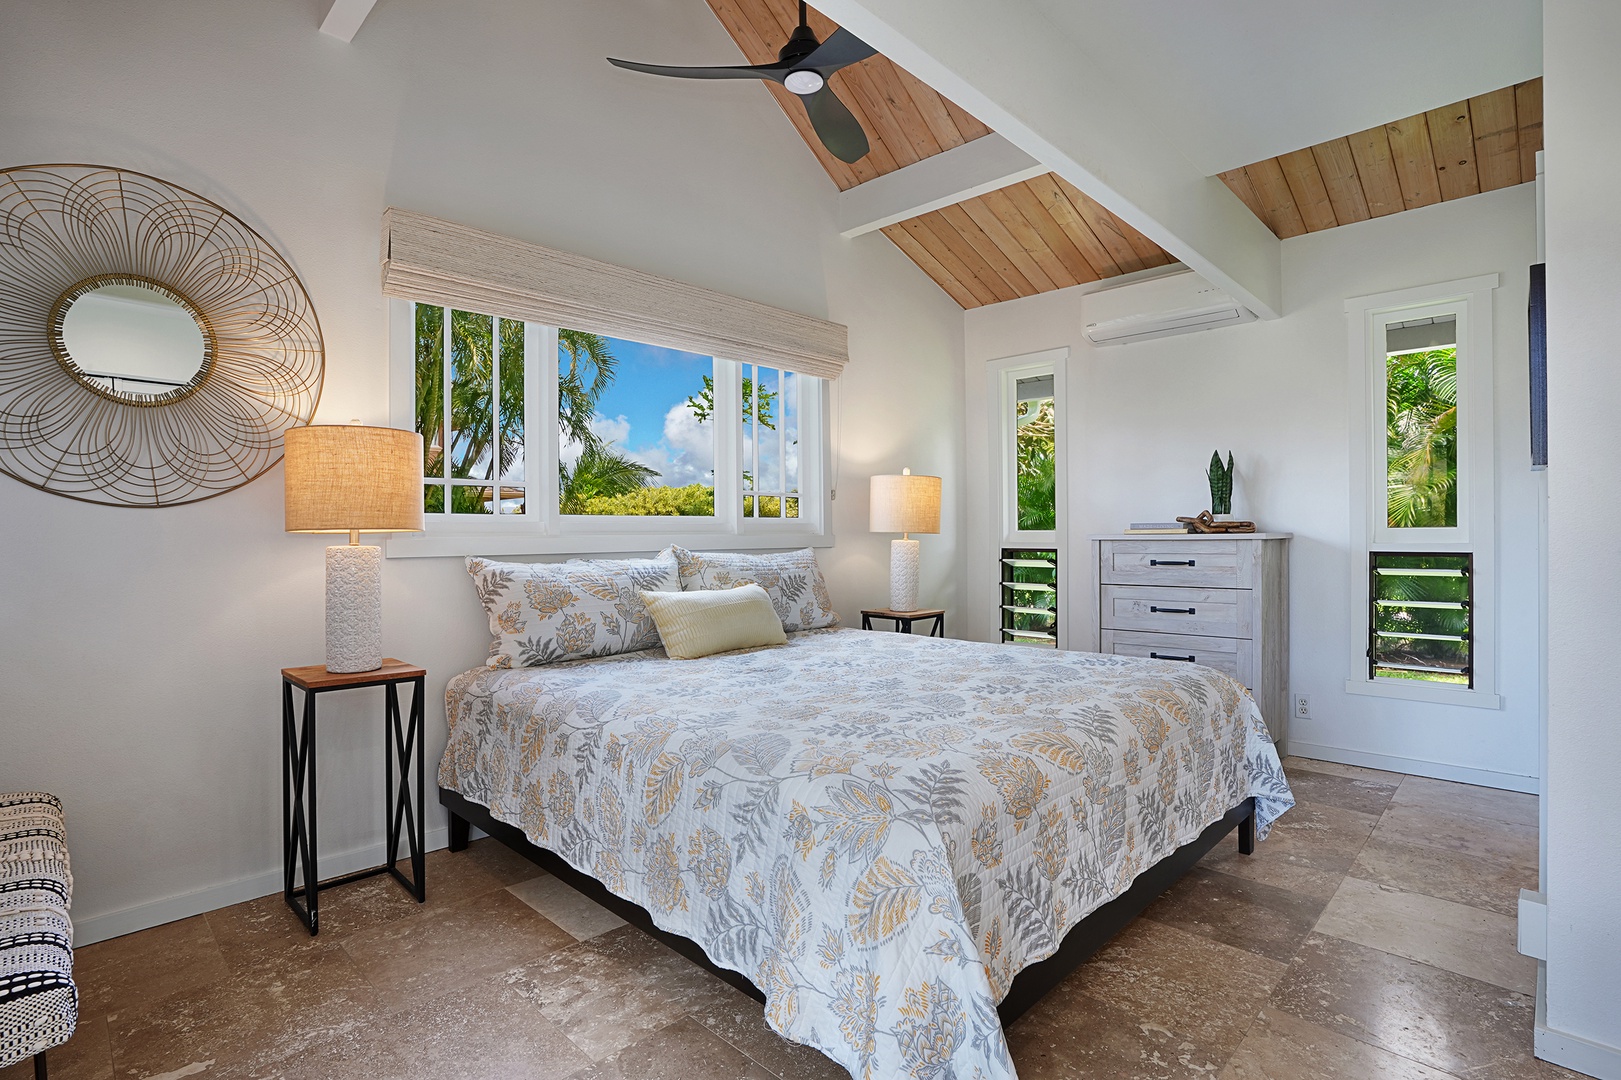 Princeville Vacation Rentals, Kaiana Villa - The Guest Bedroom is located downstairs and offers a king bed and tropical views